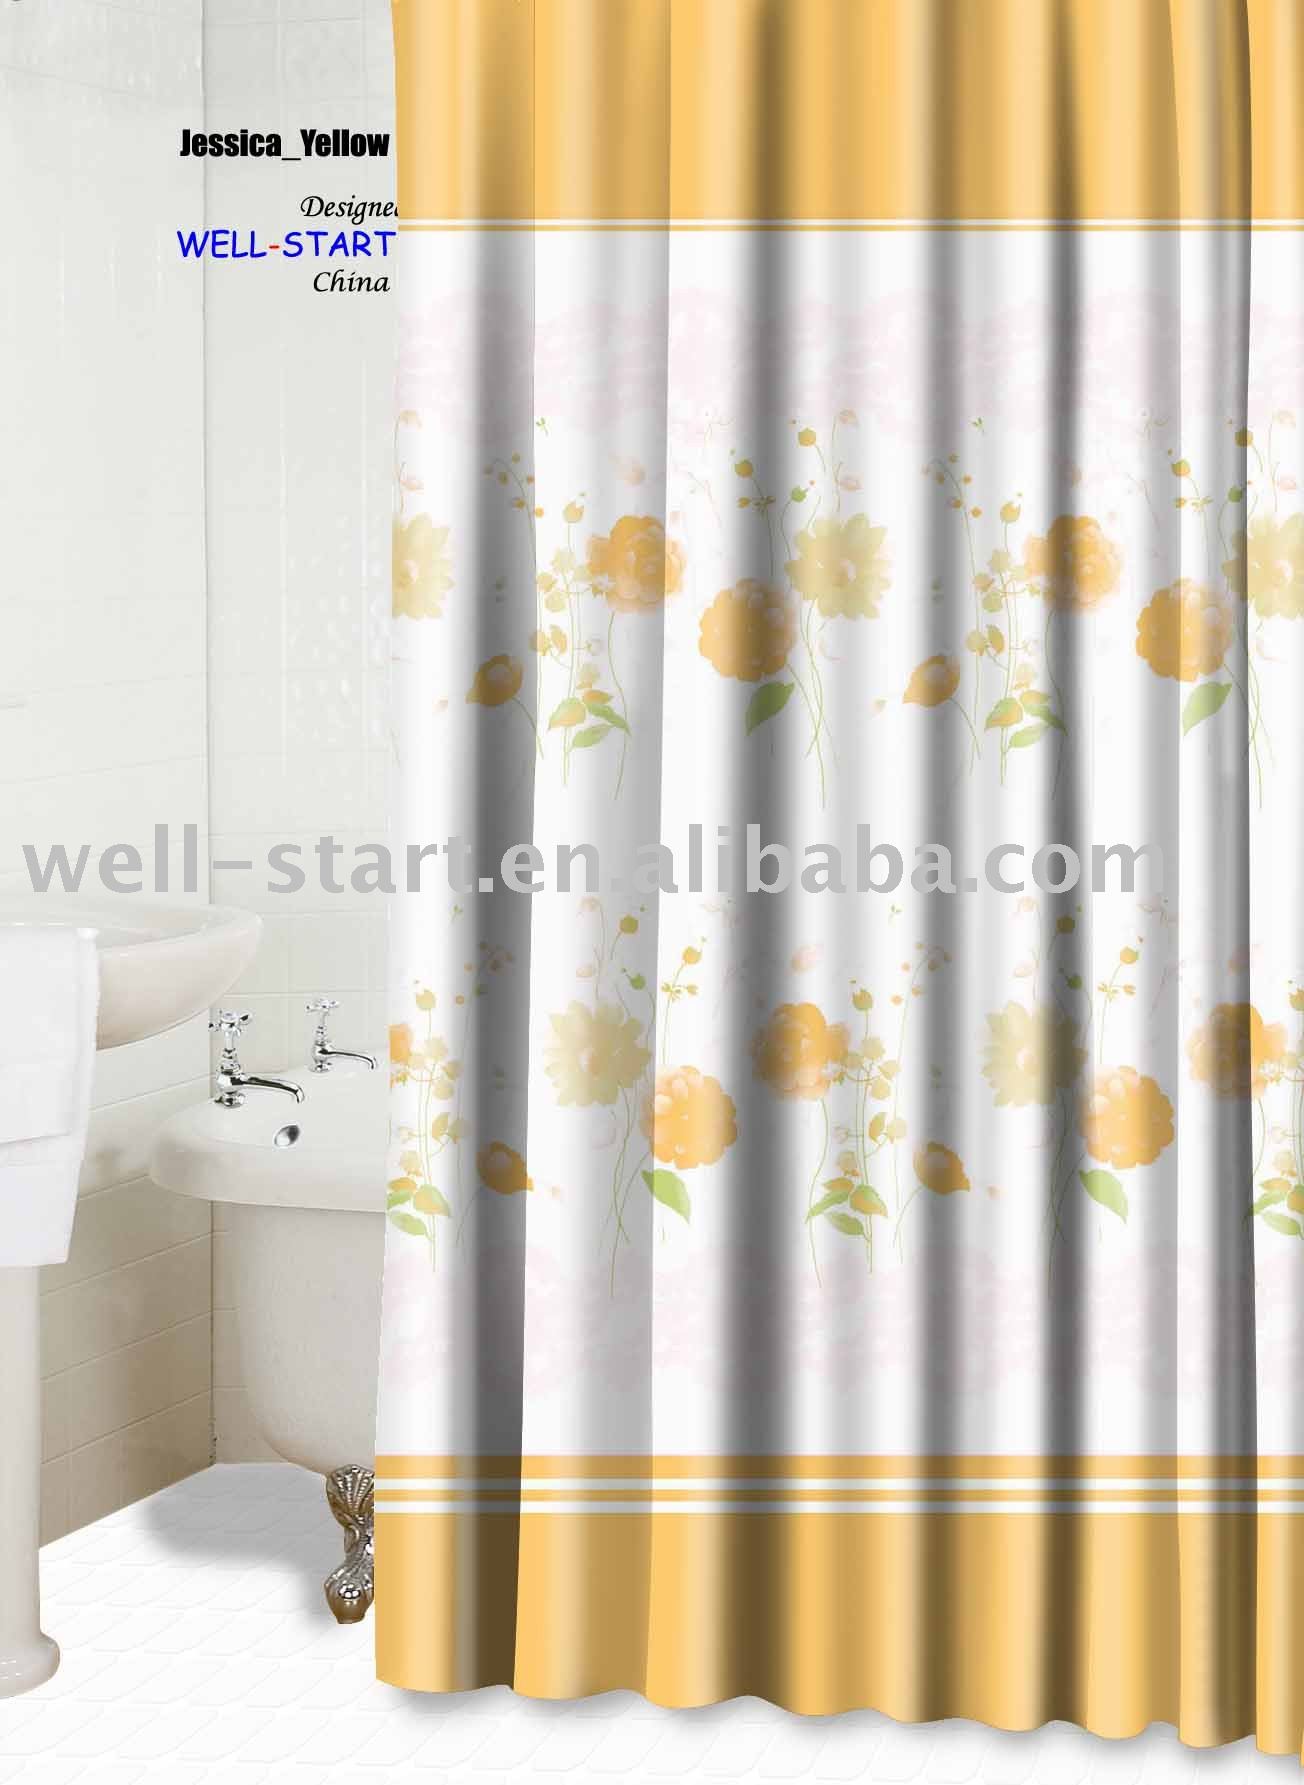 Jessia yellow printed polyester fabric shower curtain,View shower ...